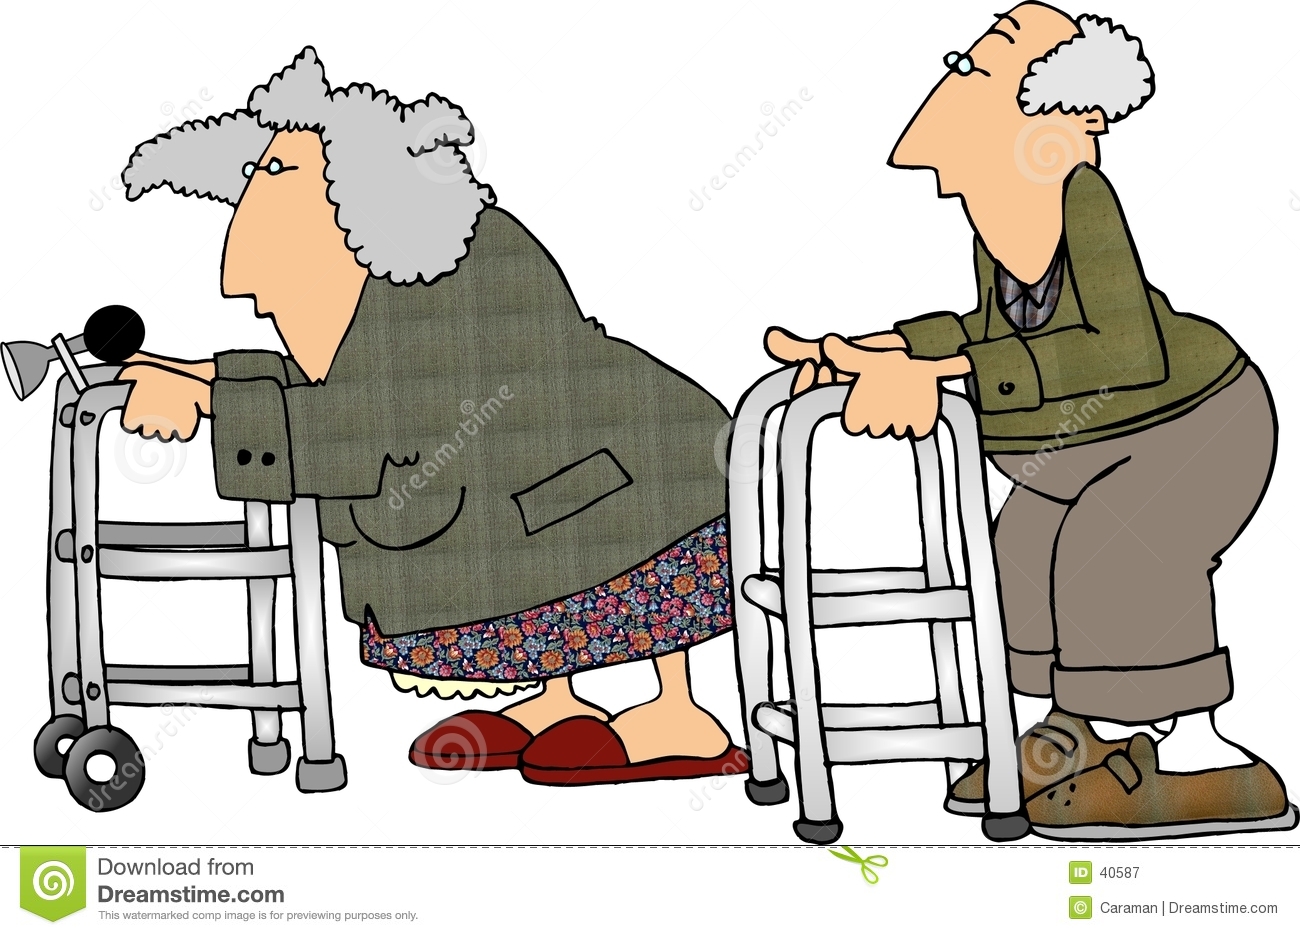 This Illustration That I Created Depicts An Old Man   Woman Having A